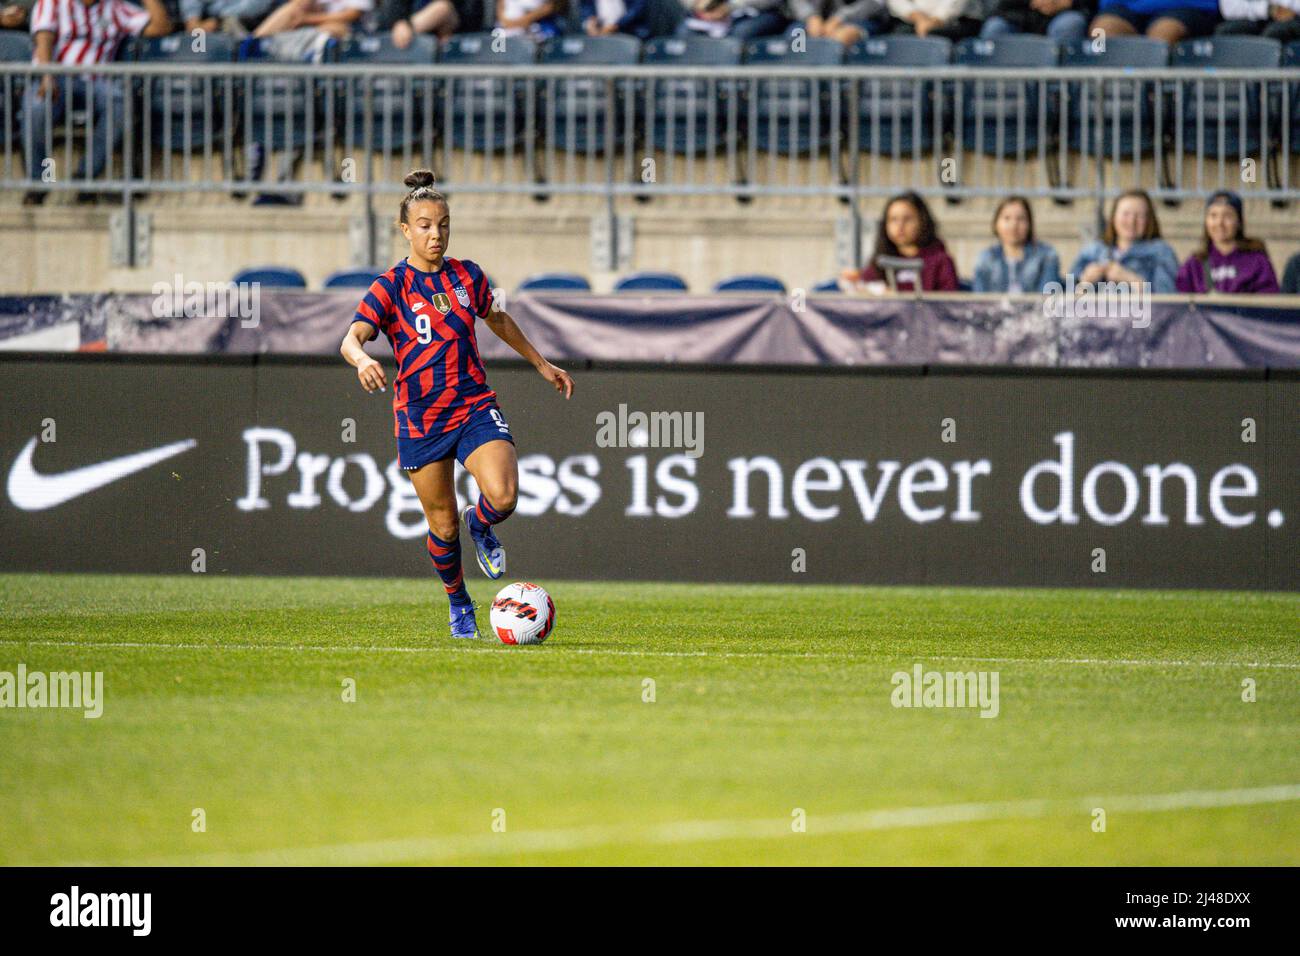 Mallory Swanson Pugh dribbling during a US women's national team soccer game. Professional woman footballer / women playing soccer Stock Photo